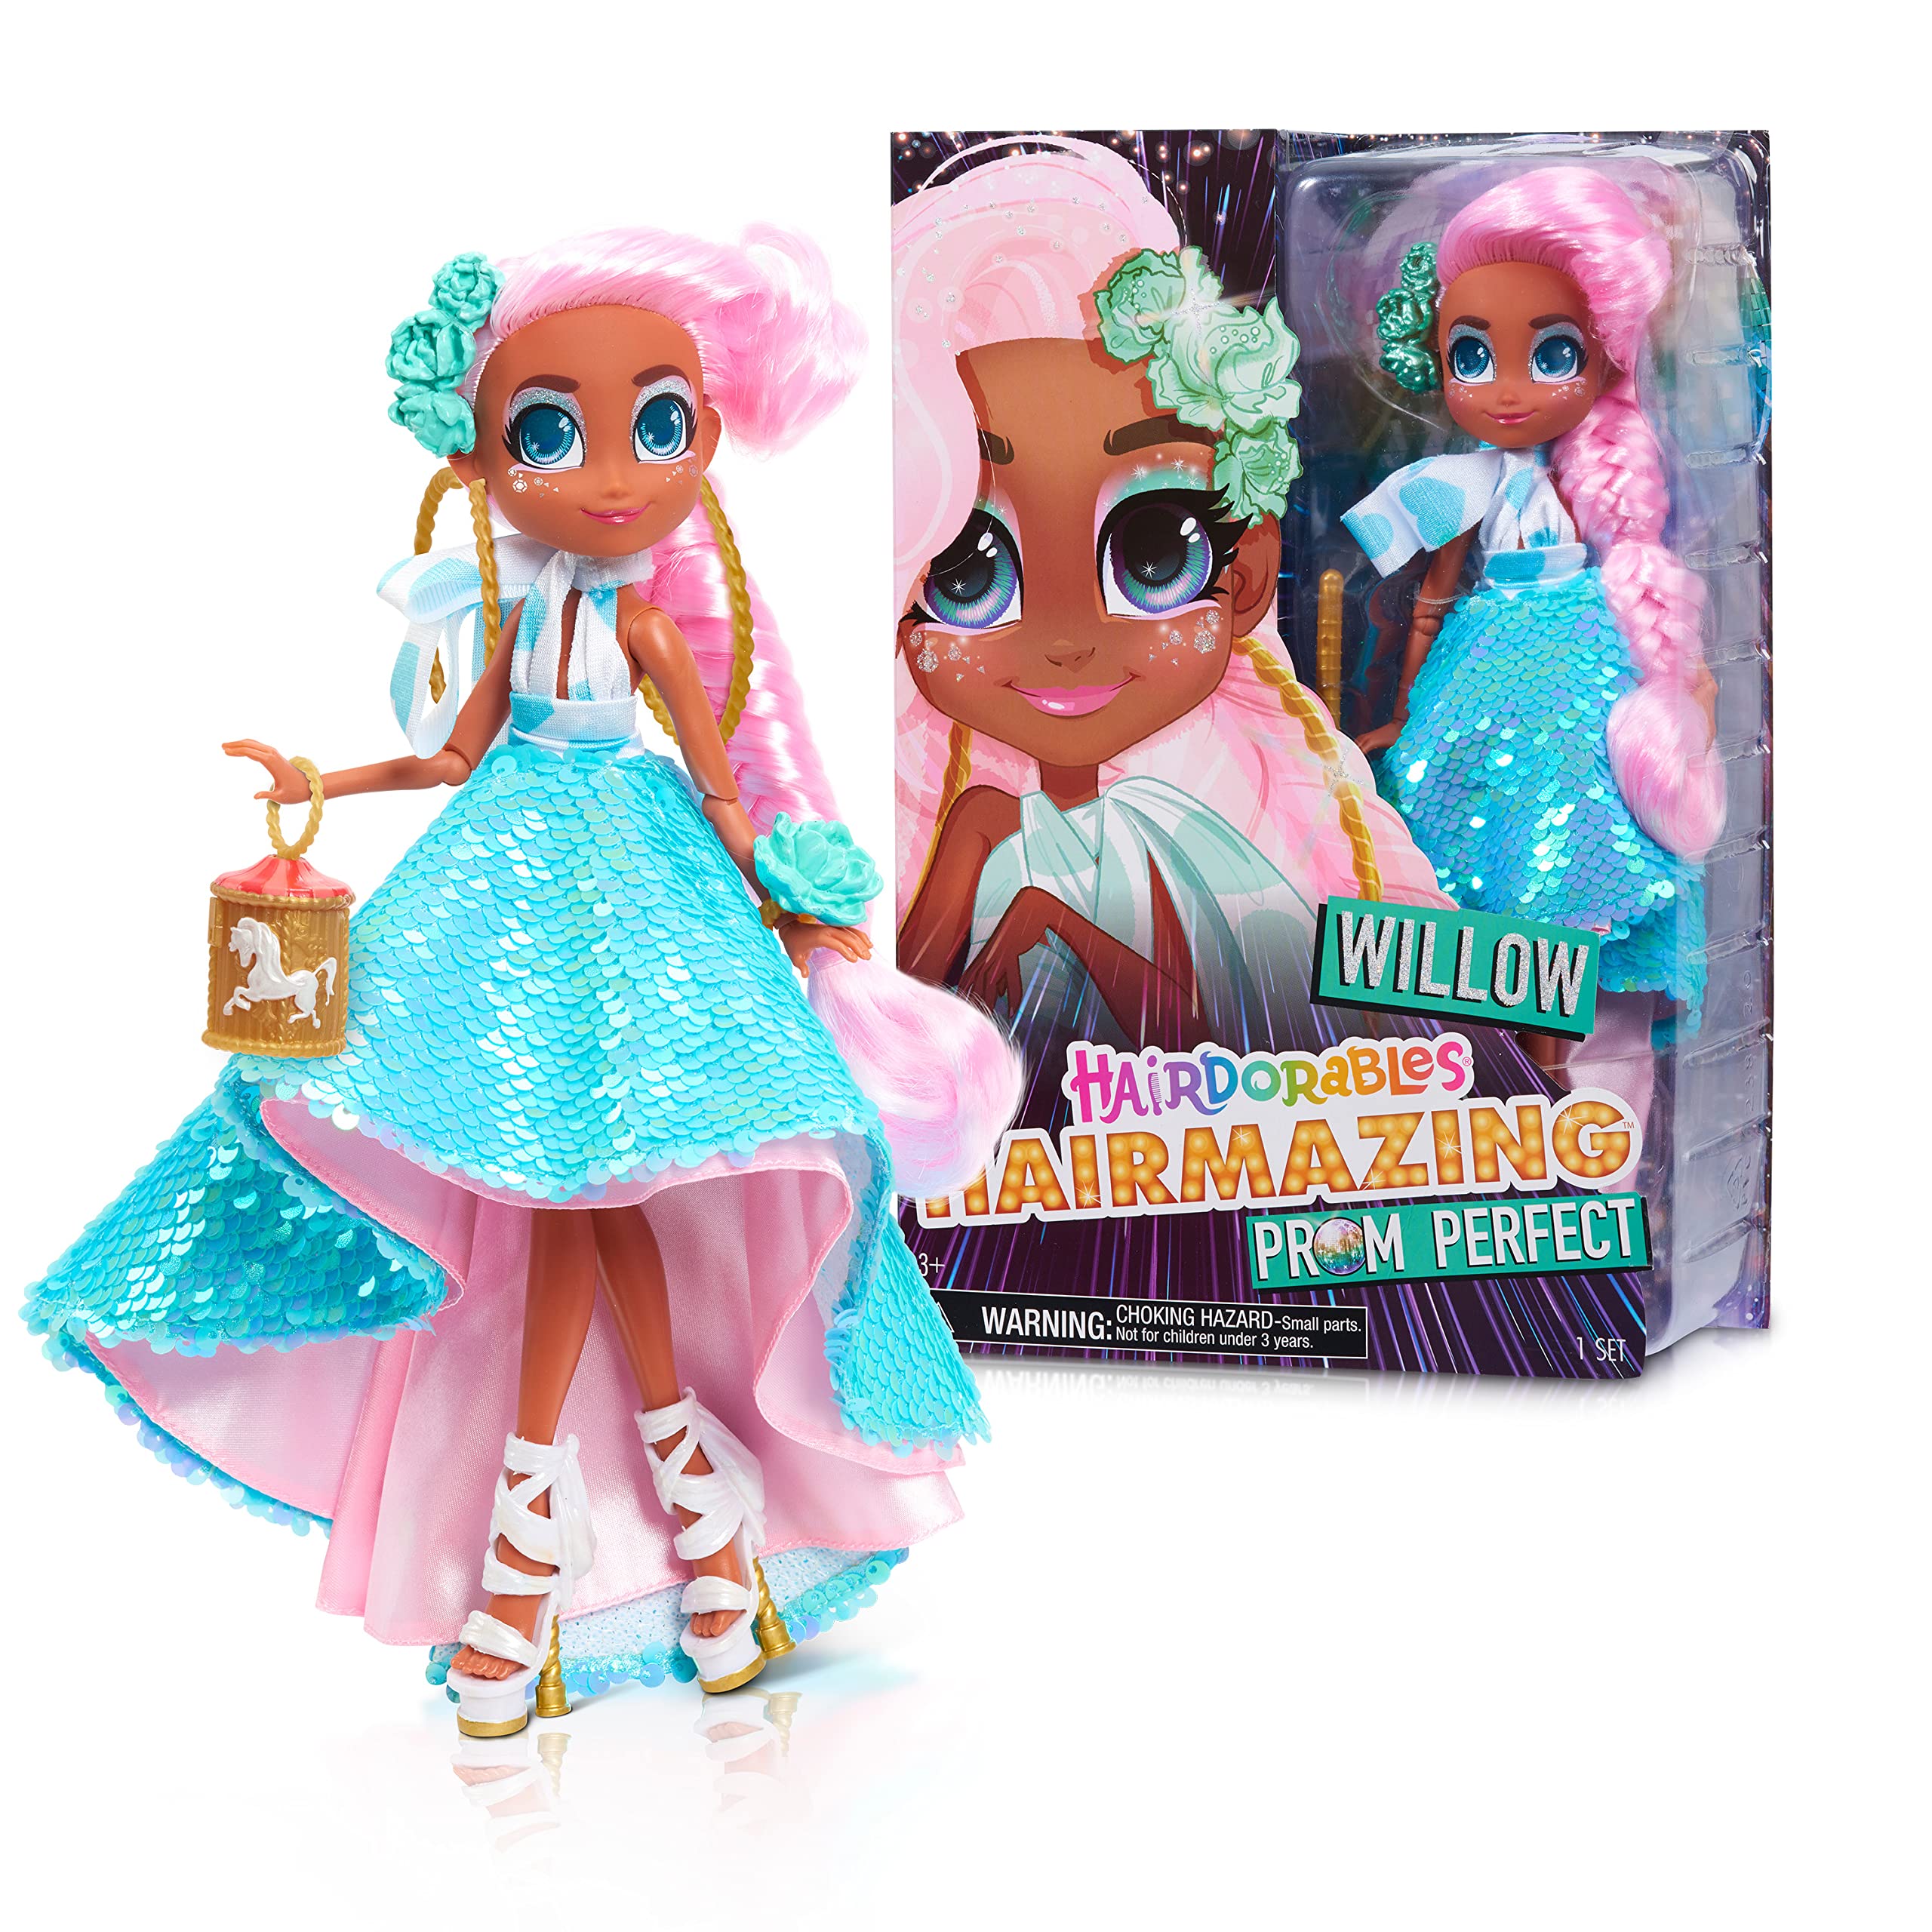 Hairdorables Hairmazing Prom Perfect Fashion Dolls, Willow, Pink and Green Hair, Kids Toys for Ages 3 Up, Gifts and Presents by Just Play